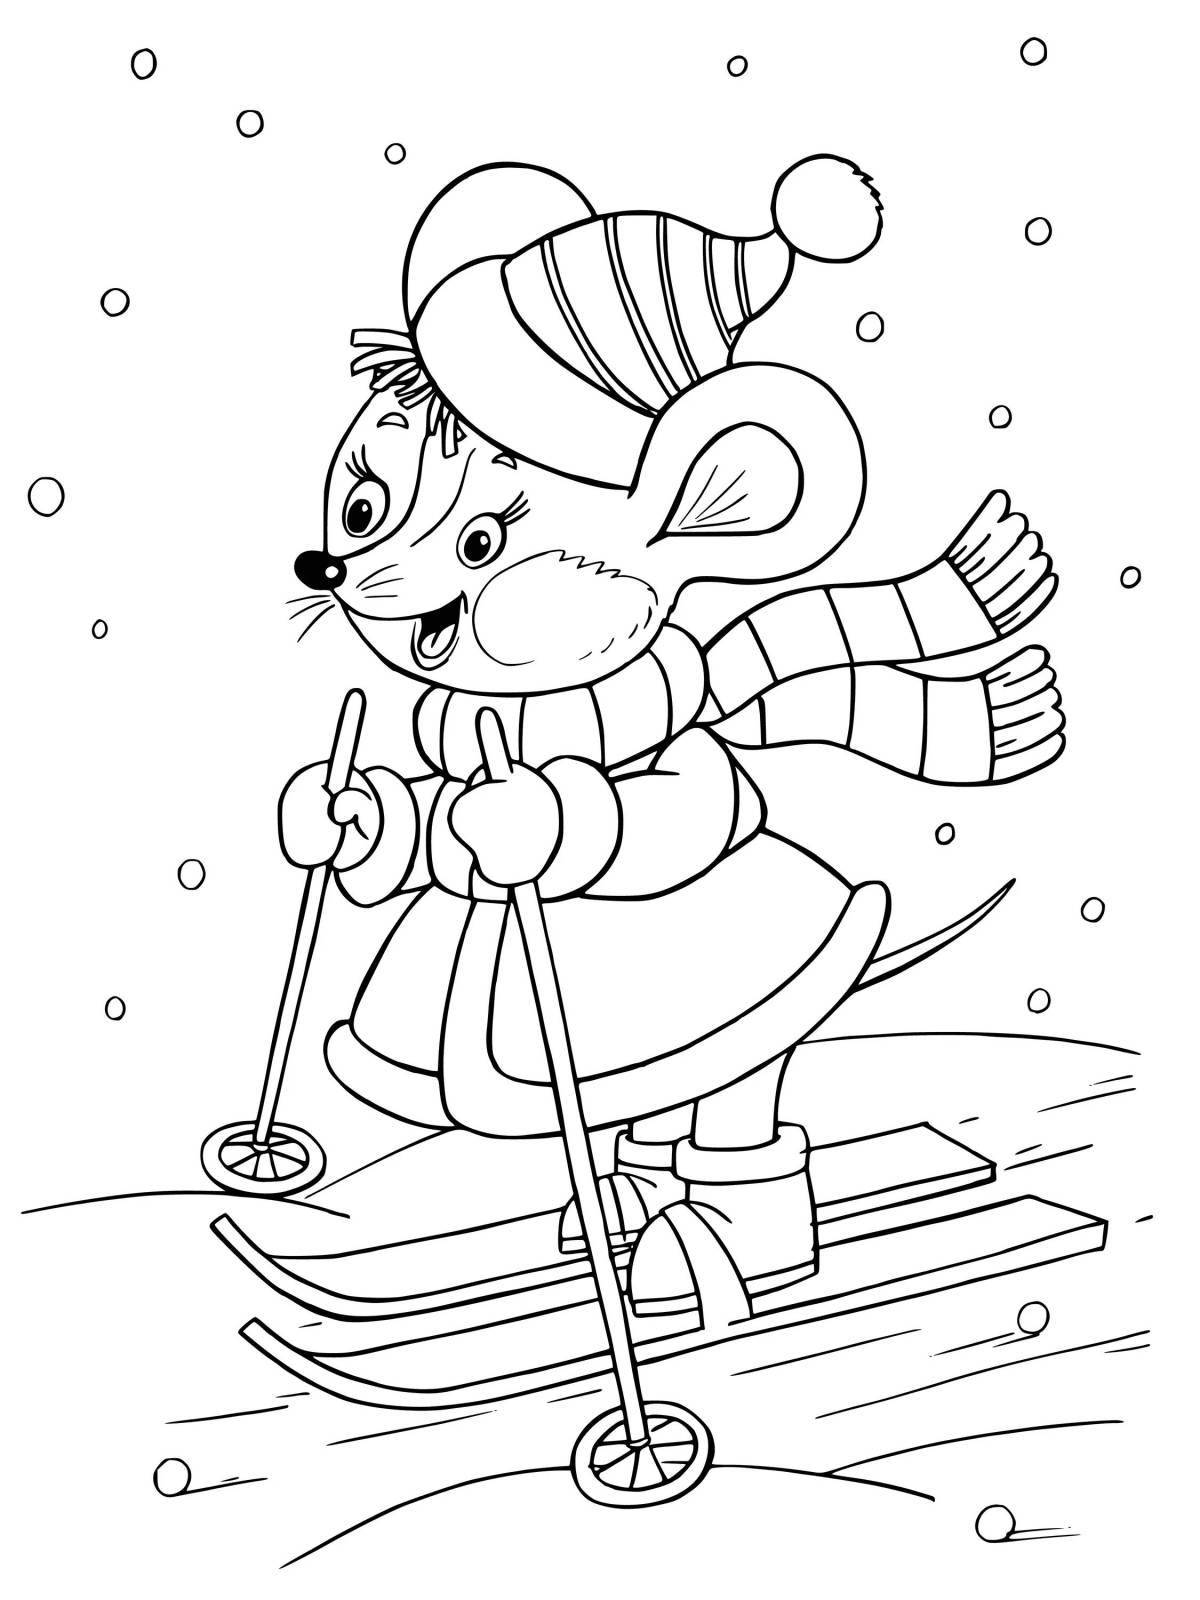 Glorious coloring book for children 6 years old winter